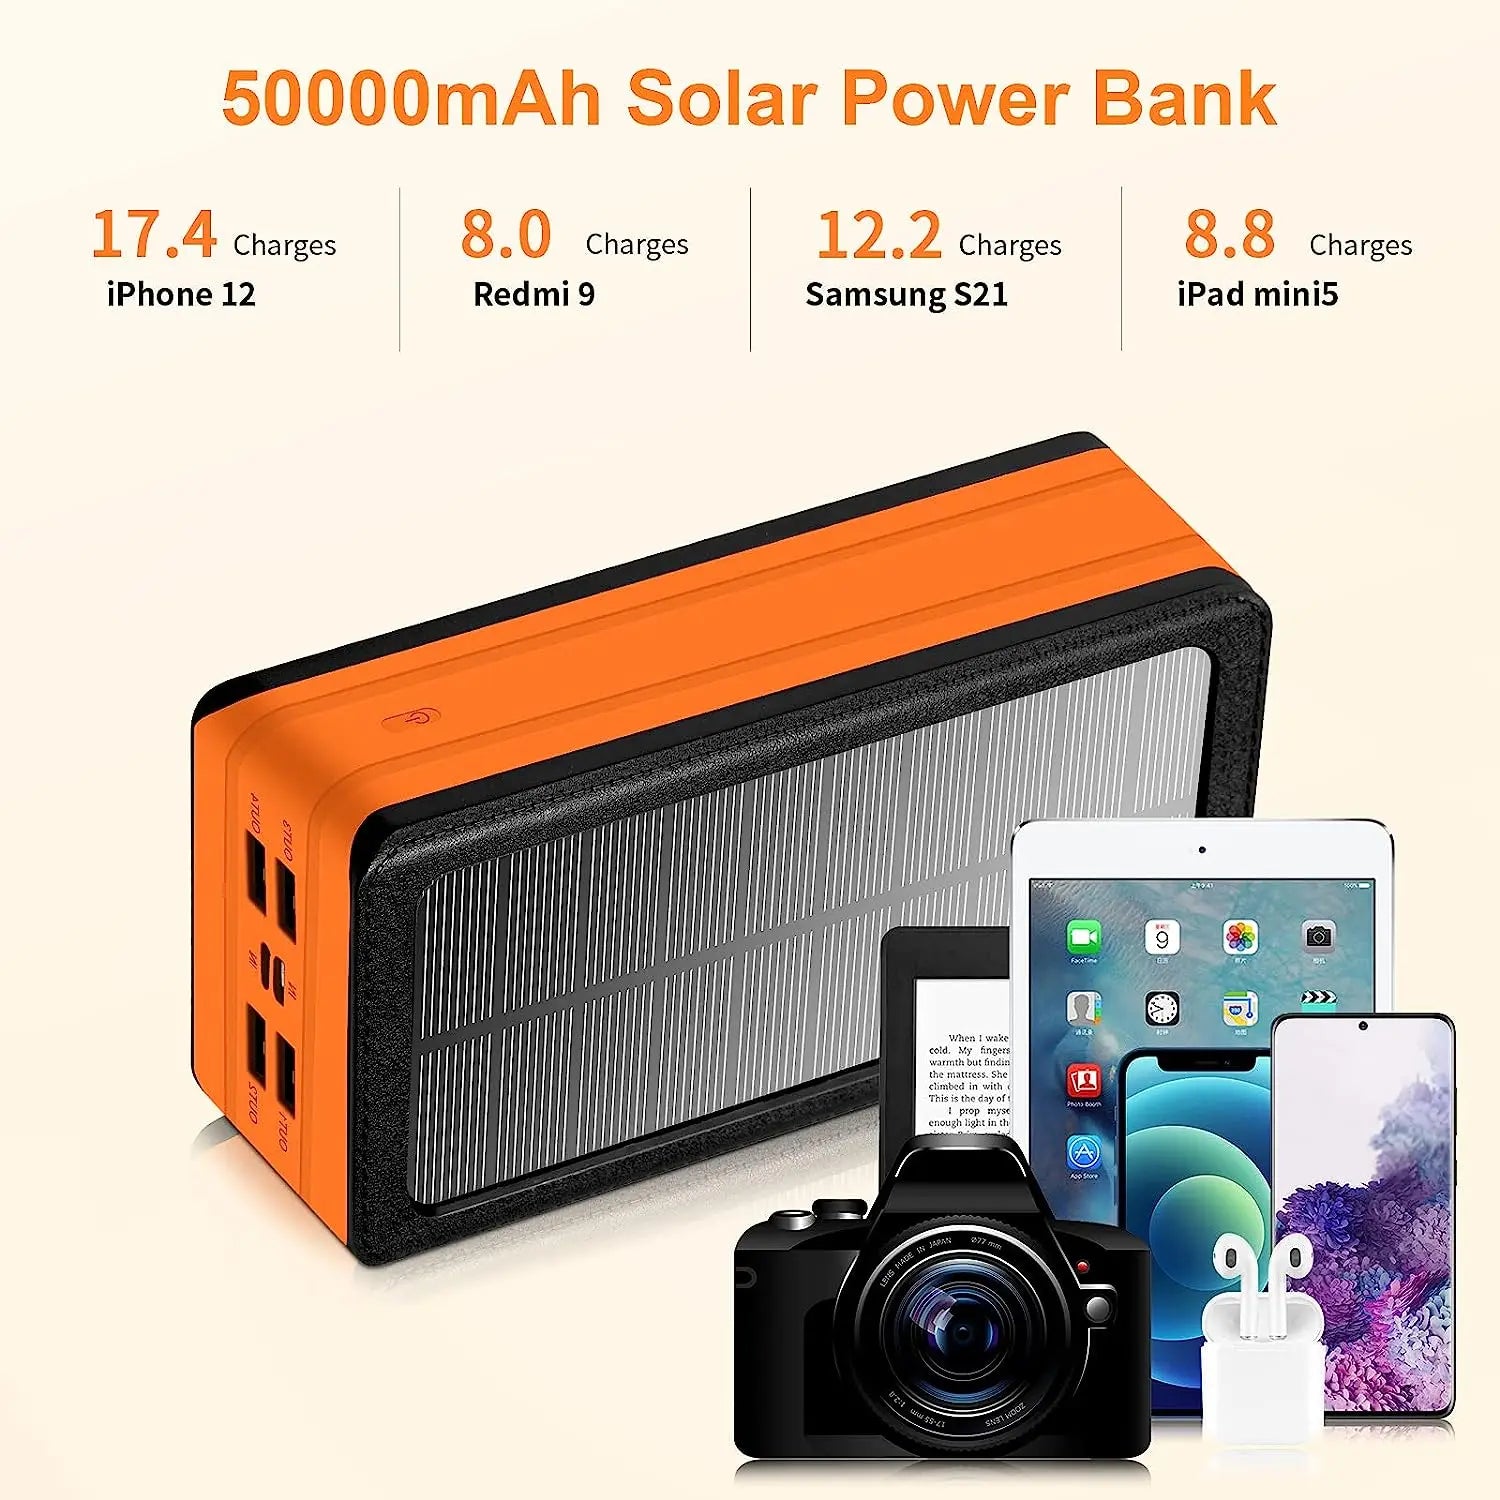  Solar Power Bank 50000mAh, Portable Solar Phone Charger with  Flashlight, 4 Output Ports, 2 Input Ports, Solar Battery Bank Compatible  with iPhone for Camping, Hiking, Trips : Cell Phones & Accessories